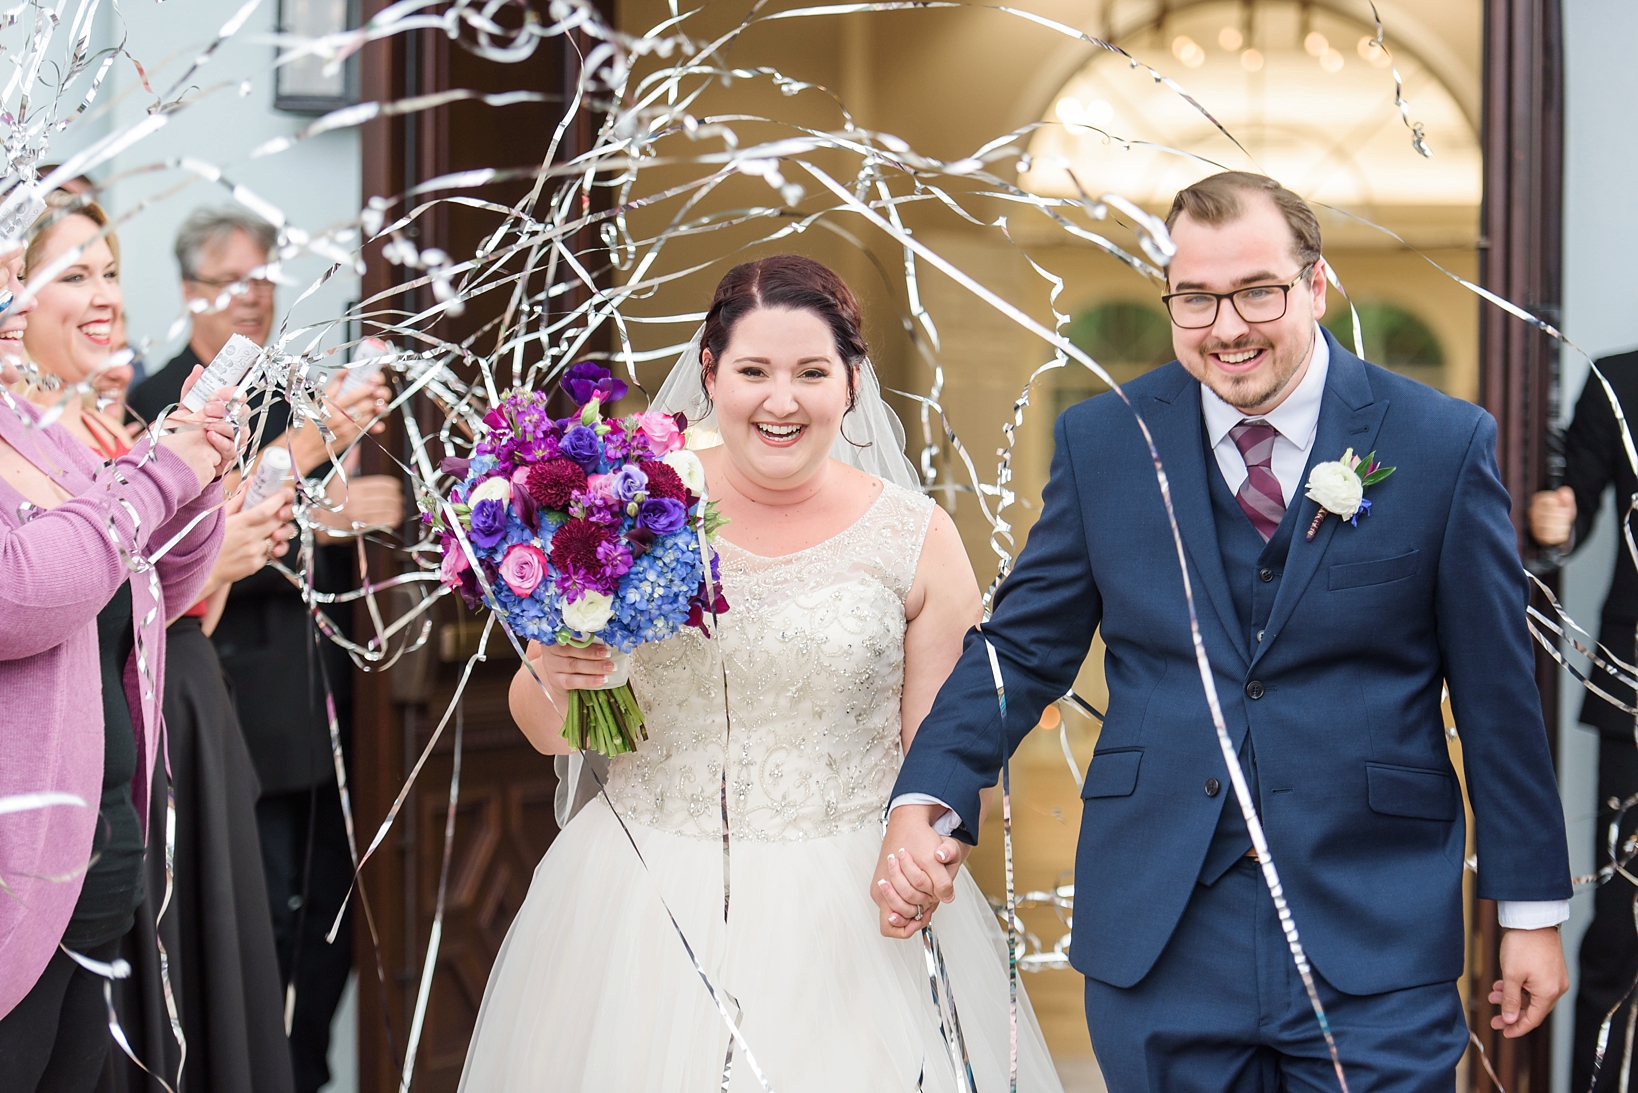 A confetti streamer exit as the bride and groom exit the chapel by Sarah & Ben Photography